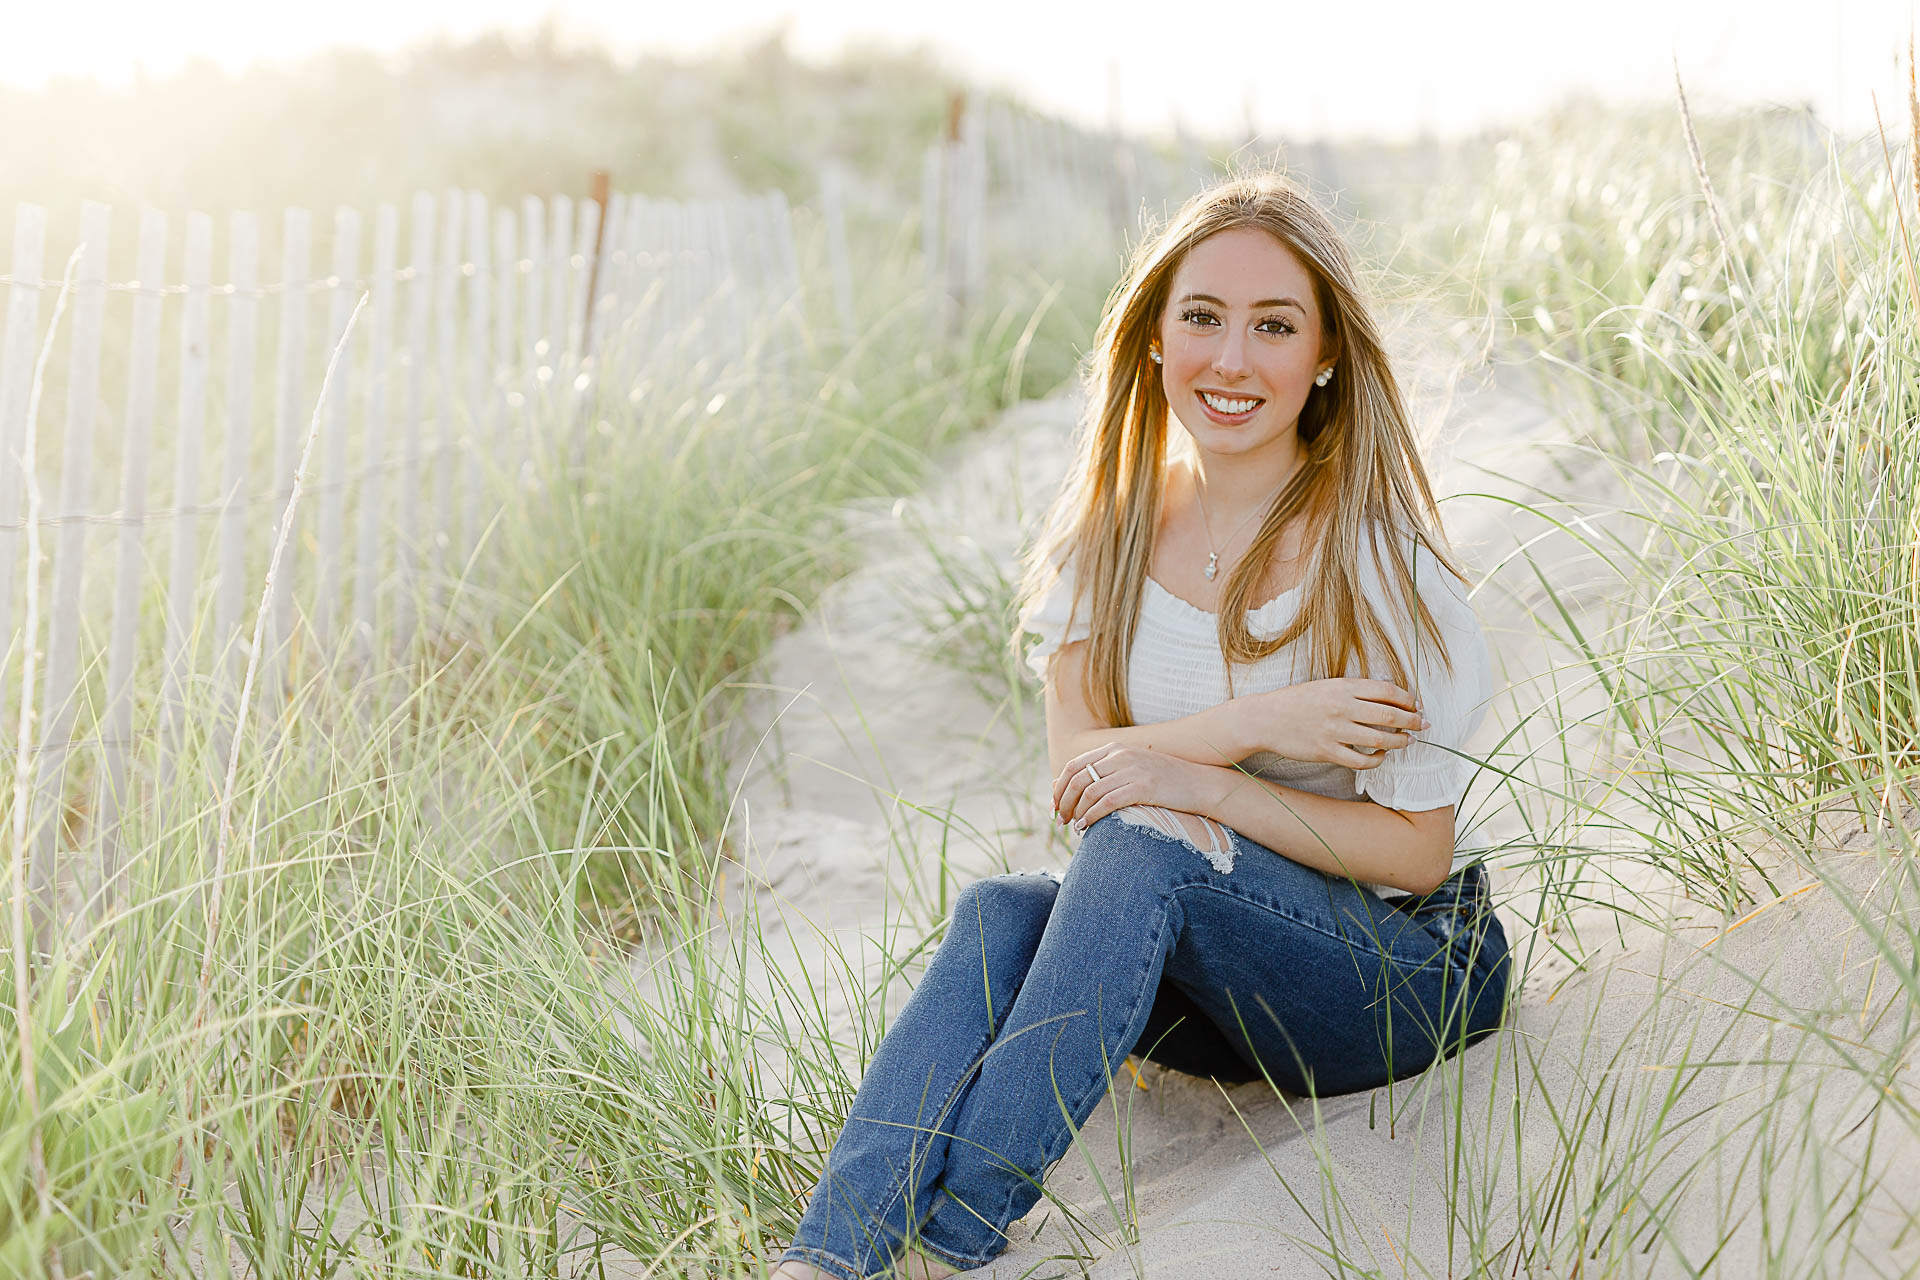 Photo by Arlington senior portrait photographer Christina Runnals | Girl sitting in beach grass with a fence